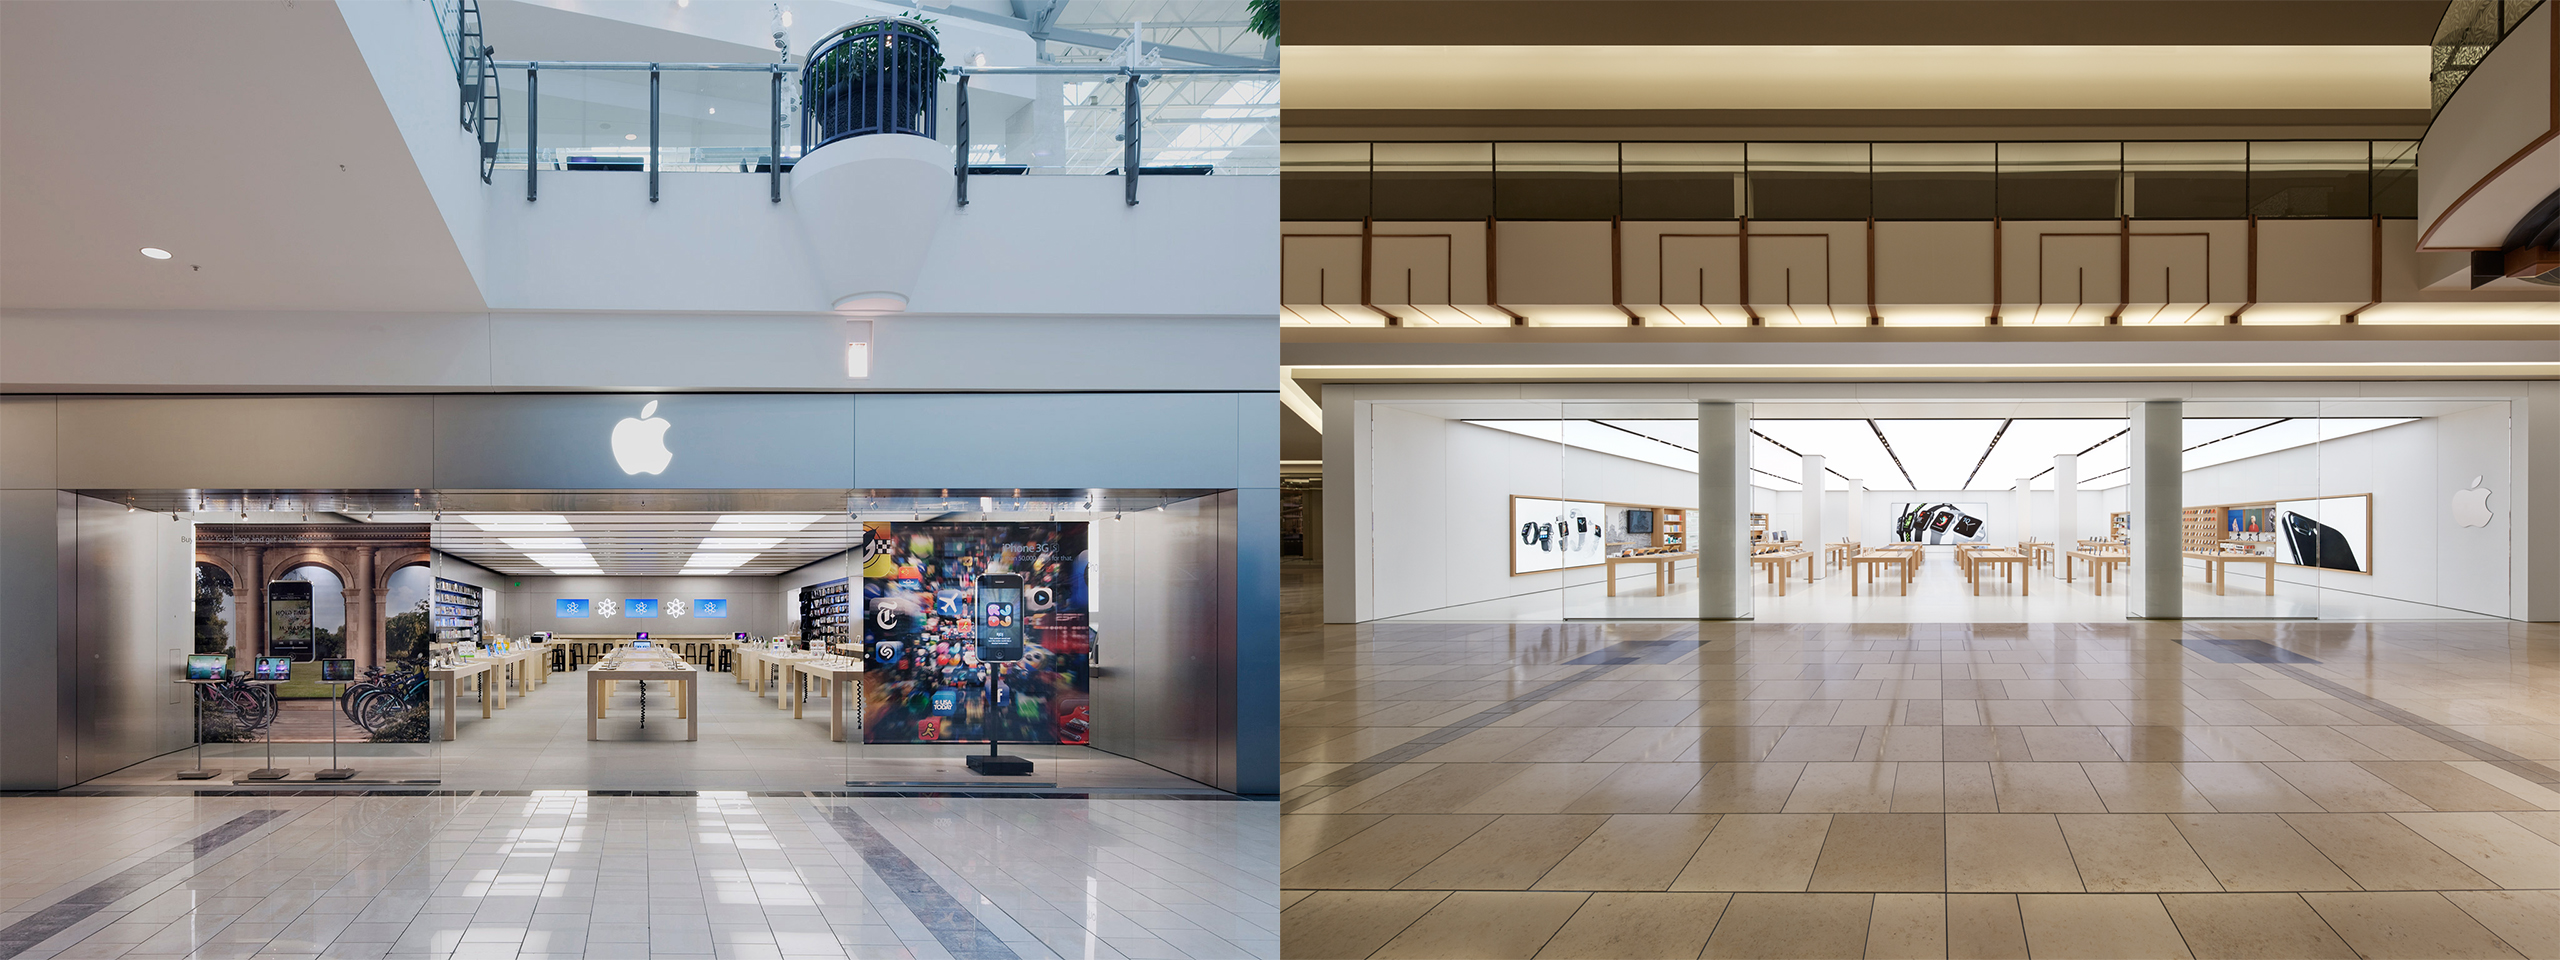 Apple may be planning to relocate its first retail store at Tysons Corner -  9to5Mac